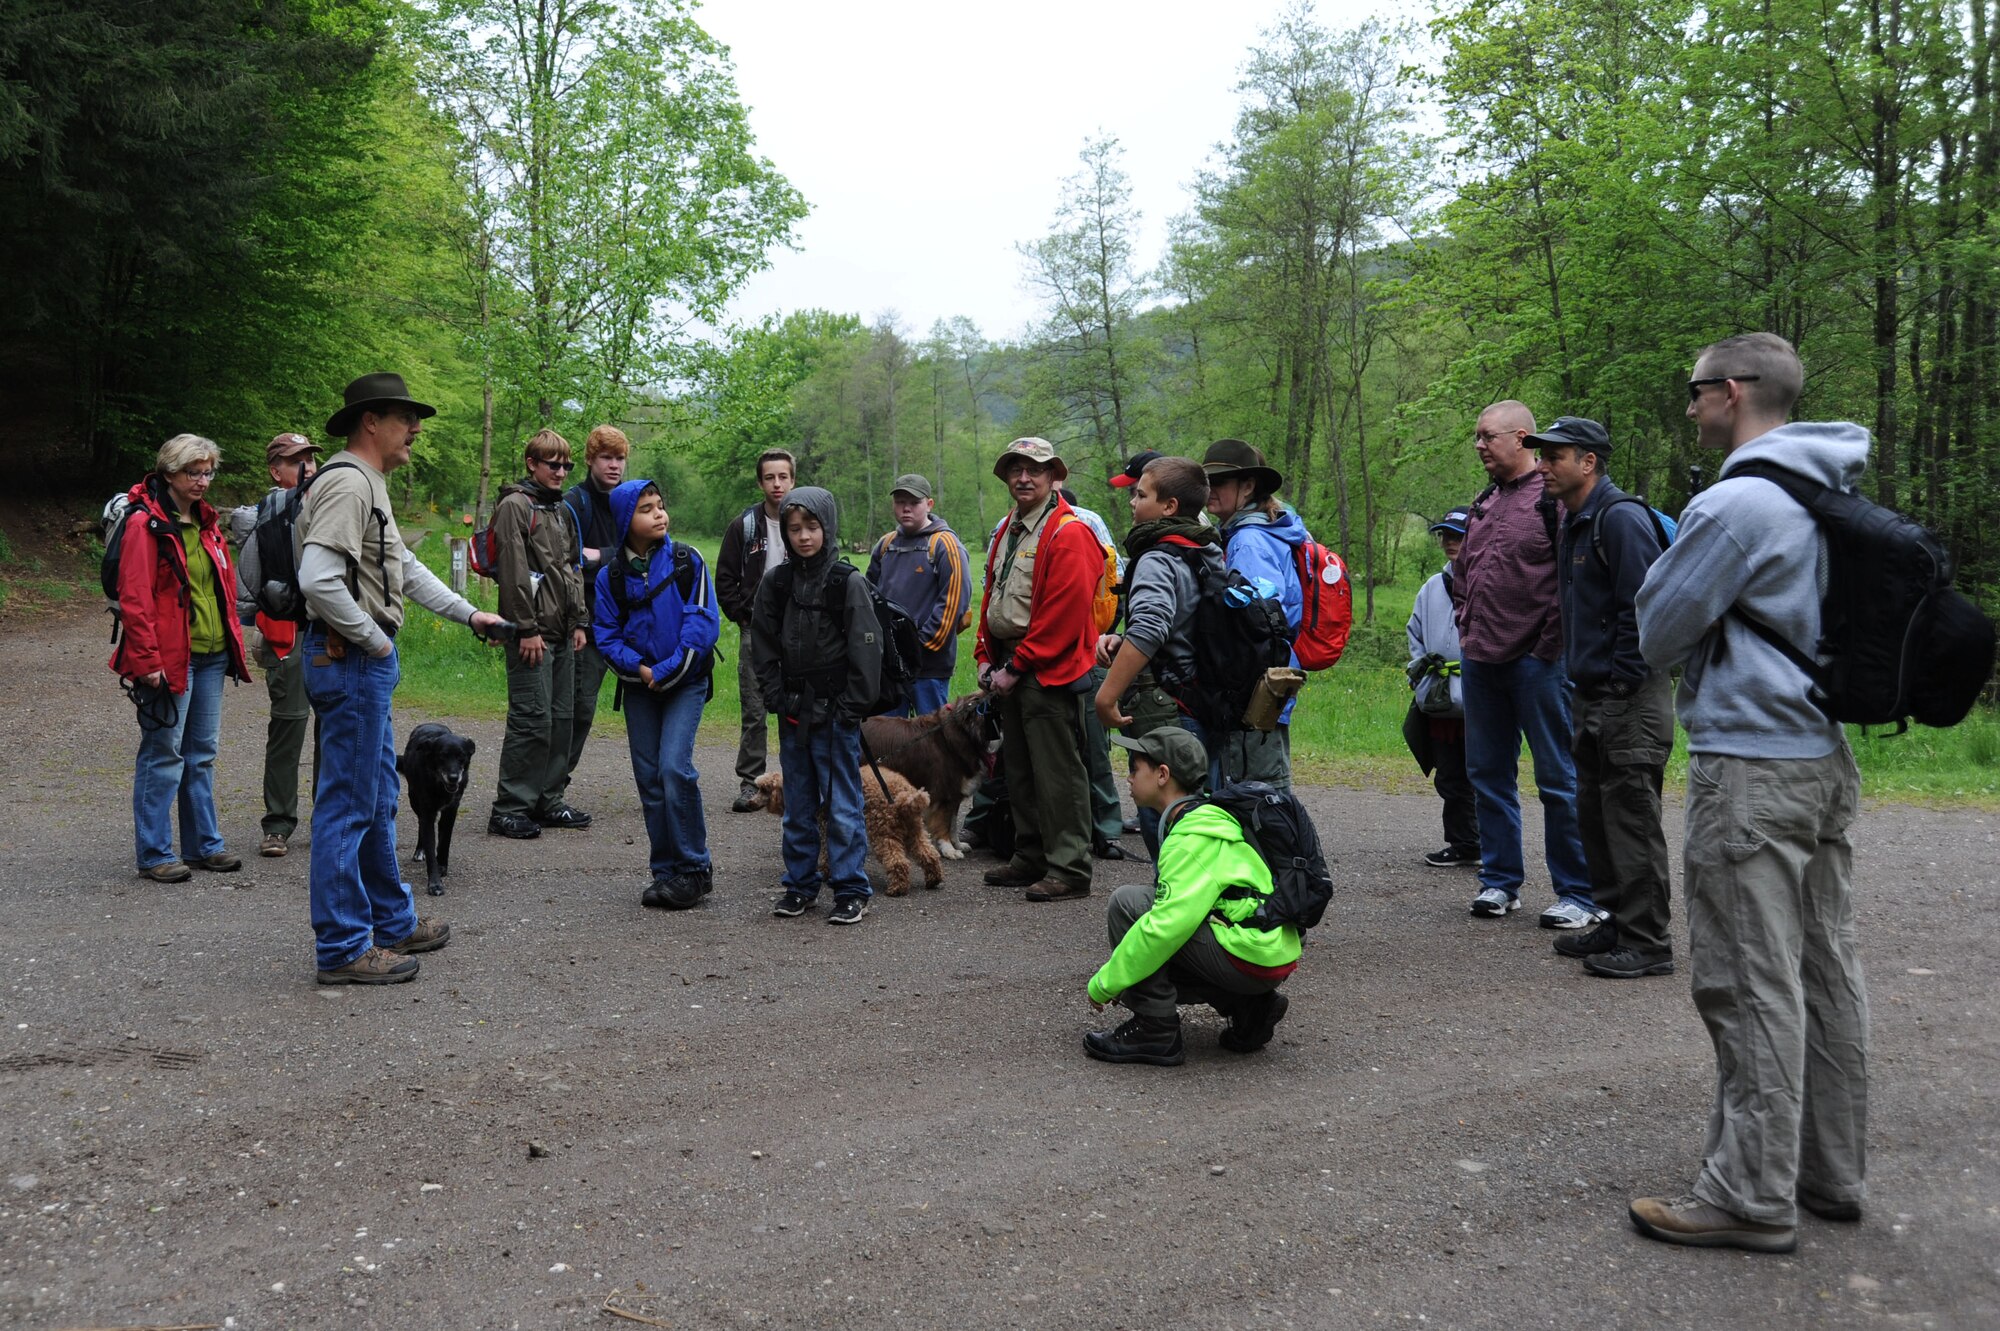 Jene Wilton, 606th Air Control Squadron Air Force engineering technical services and Boy Scouts Troop 161 assistant scout master, talks to a group of scouts and parents of troop 161 and 165 before a hike May 10, 2014, near Spangdahlem Air Base, Germany. The scouts cleaned more than 10 miles of trails for a community service project, and to raise awareness of scouting in the Eifel.  (U.S. Air Force photo by Airman 1st Class Dylan Nuckolls/Released)